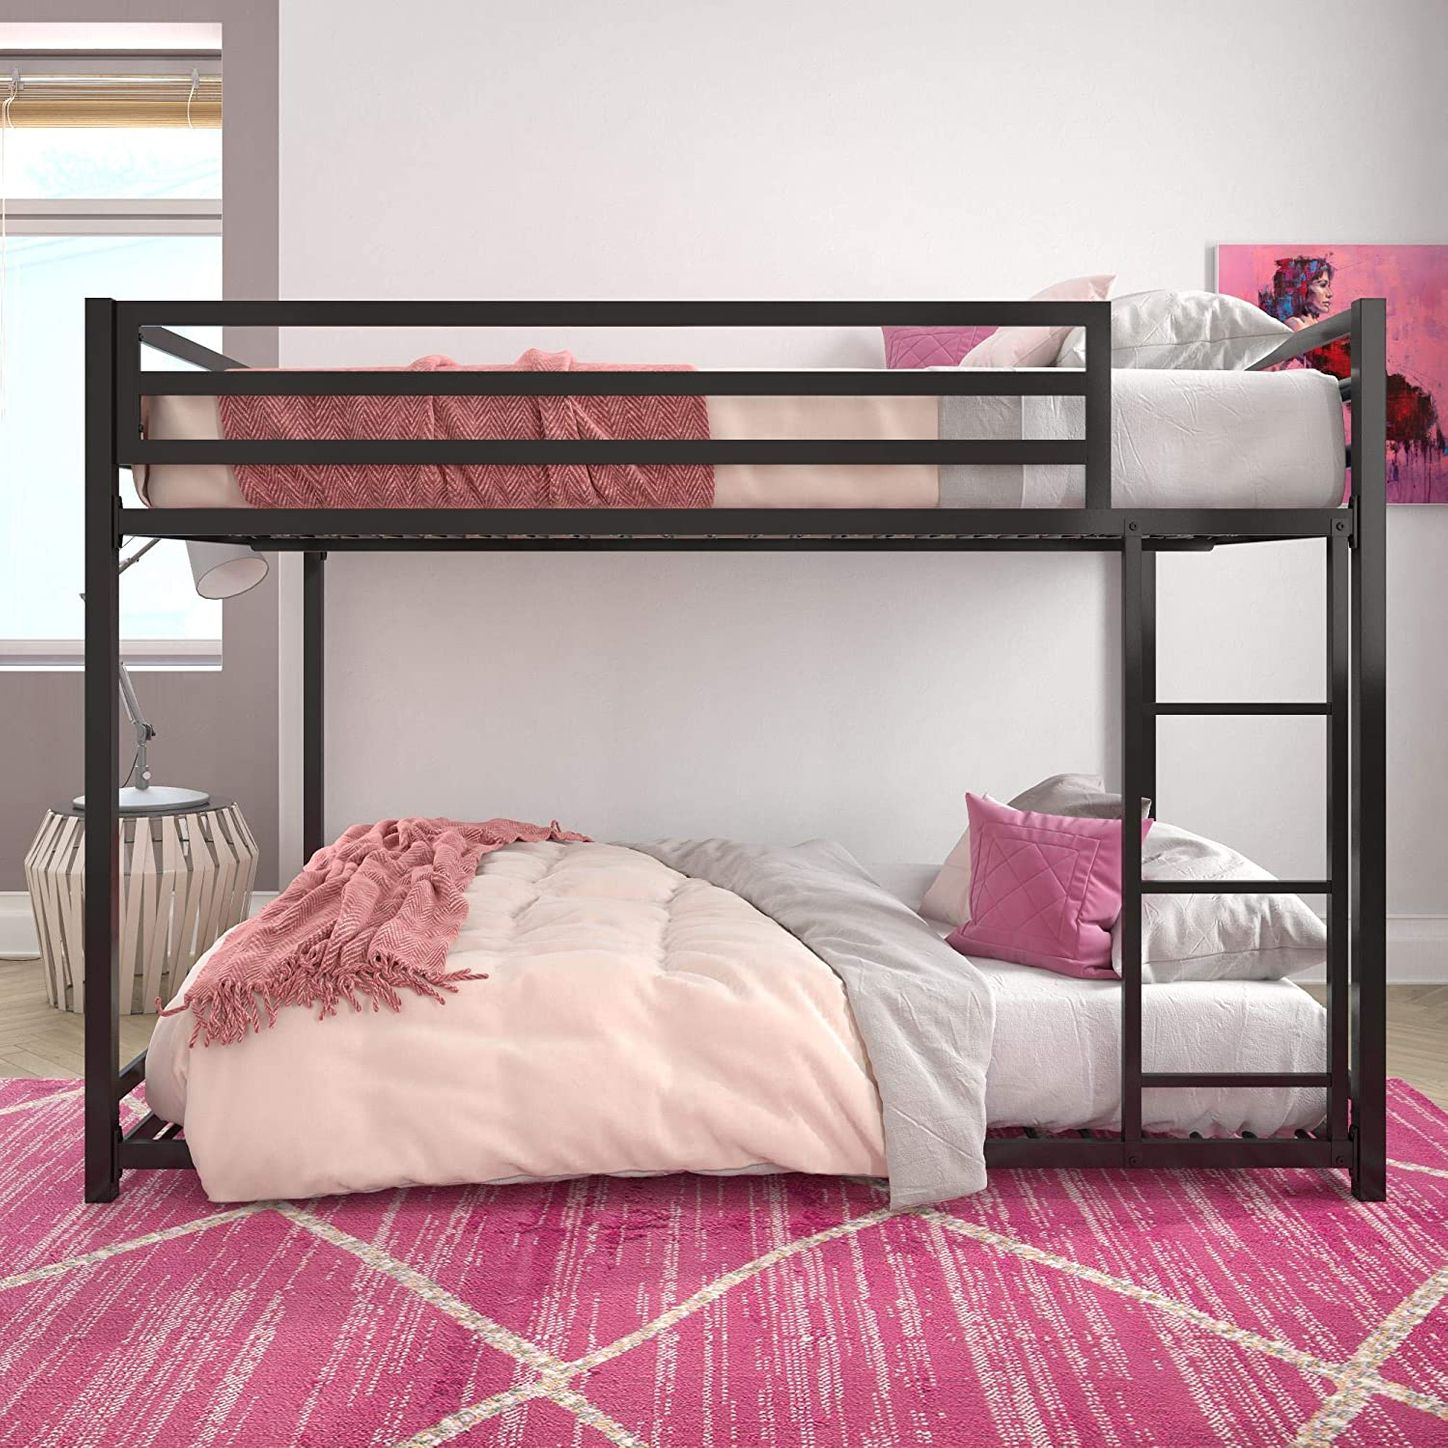 8 Best Bunk Beds 2020 The Strategist, Bunk Beds For Tall People